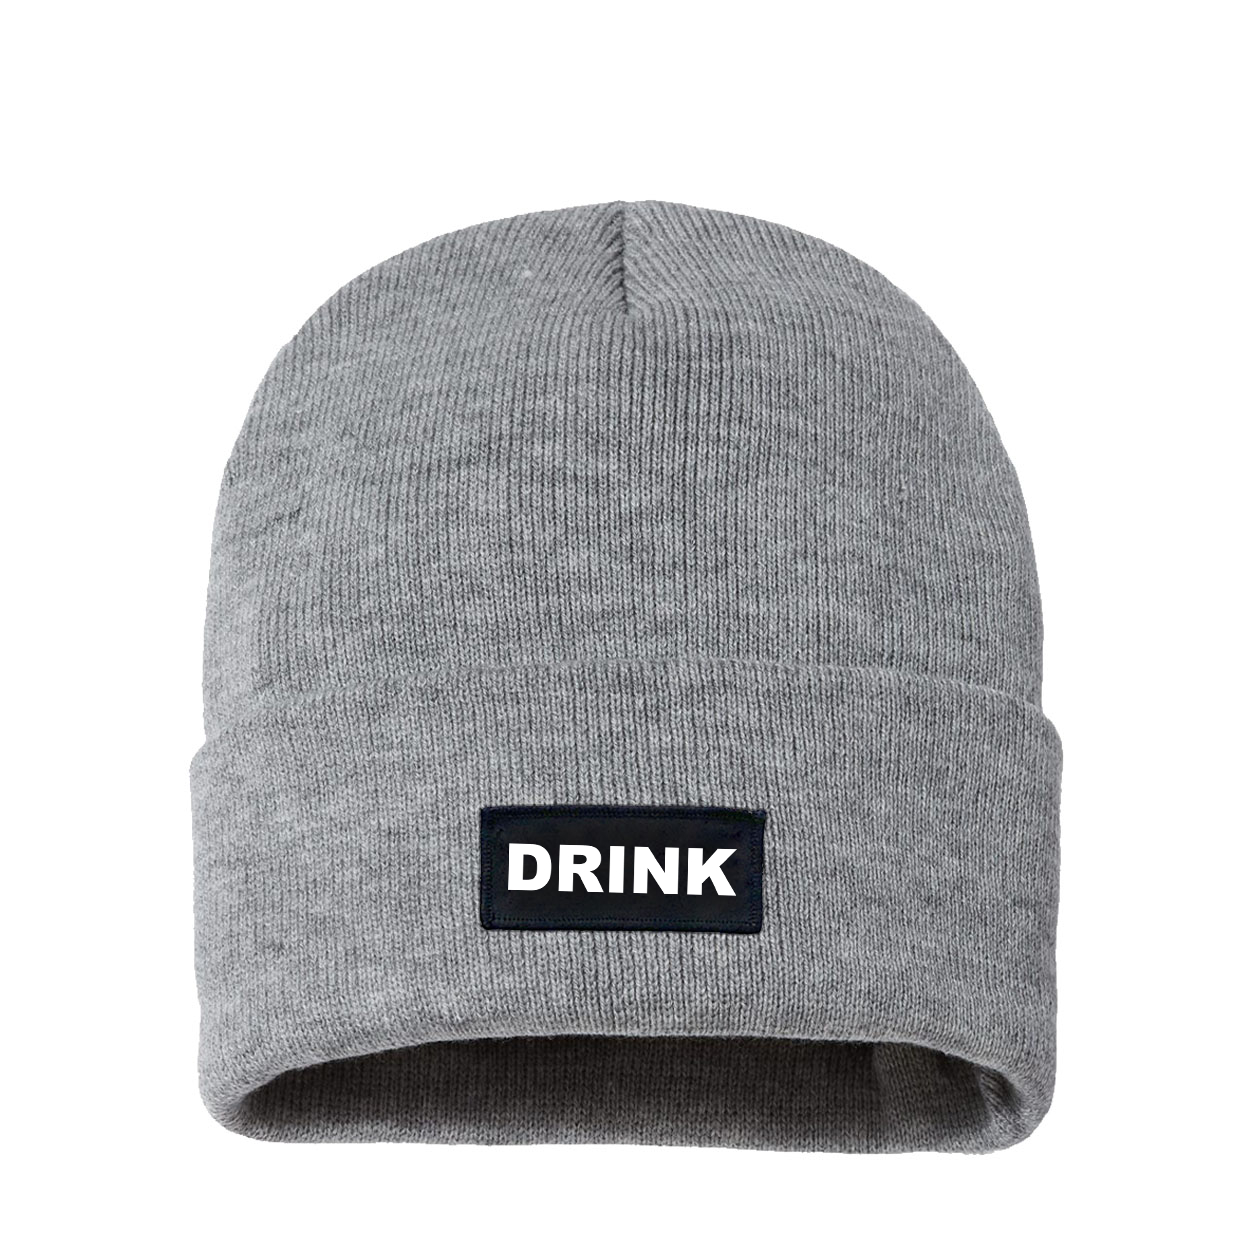 Drink Brand Logo Night Out Woven Patch Sherpa Lined Cuffed Beanie Heather Gray